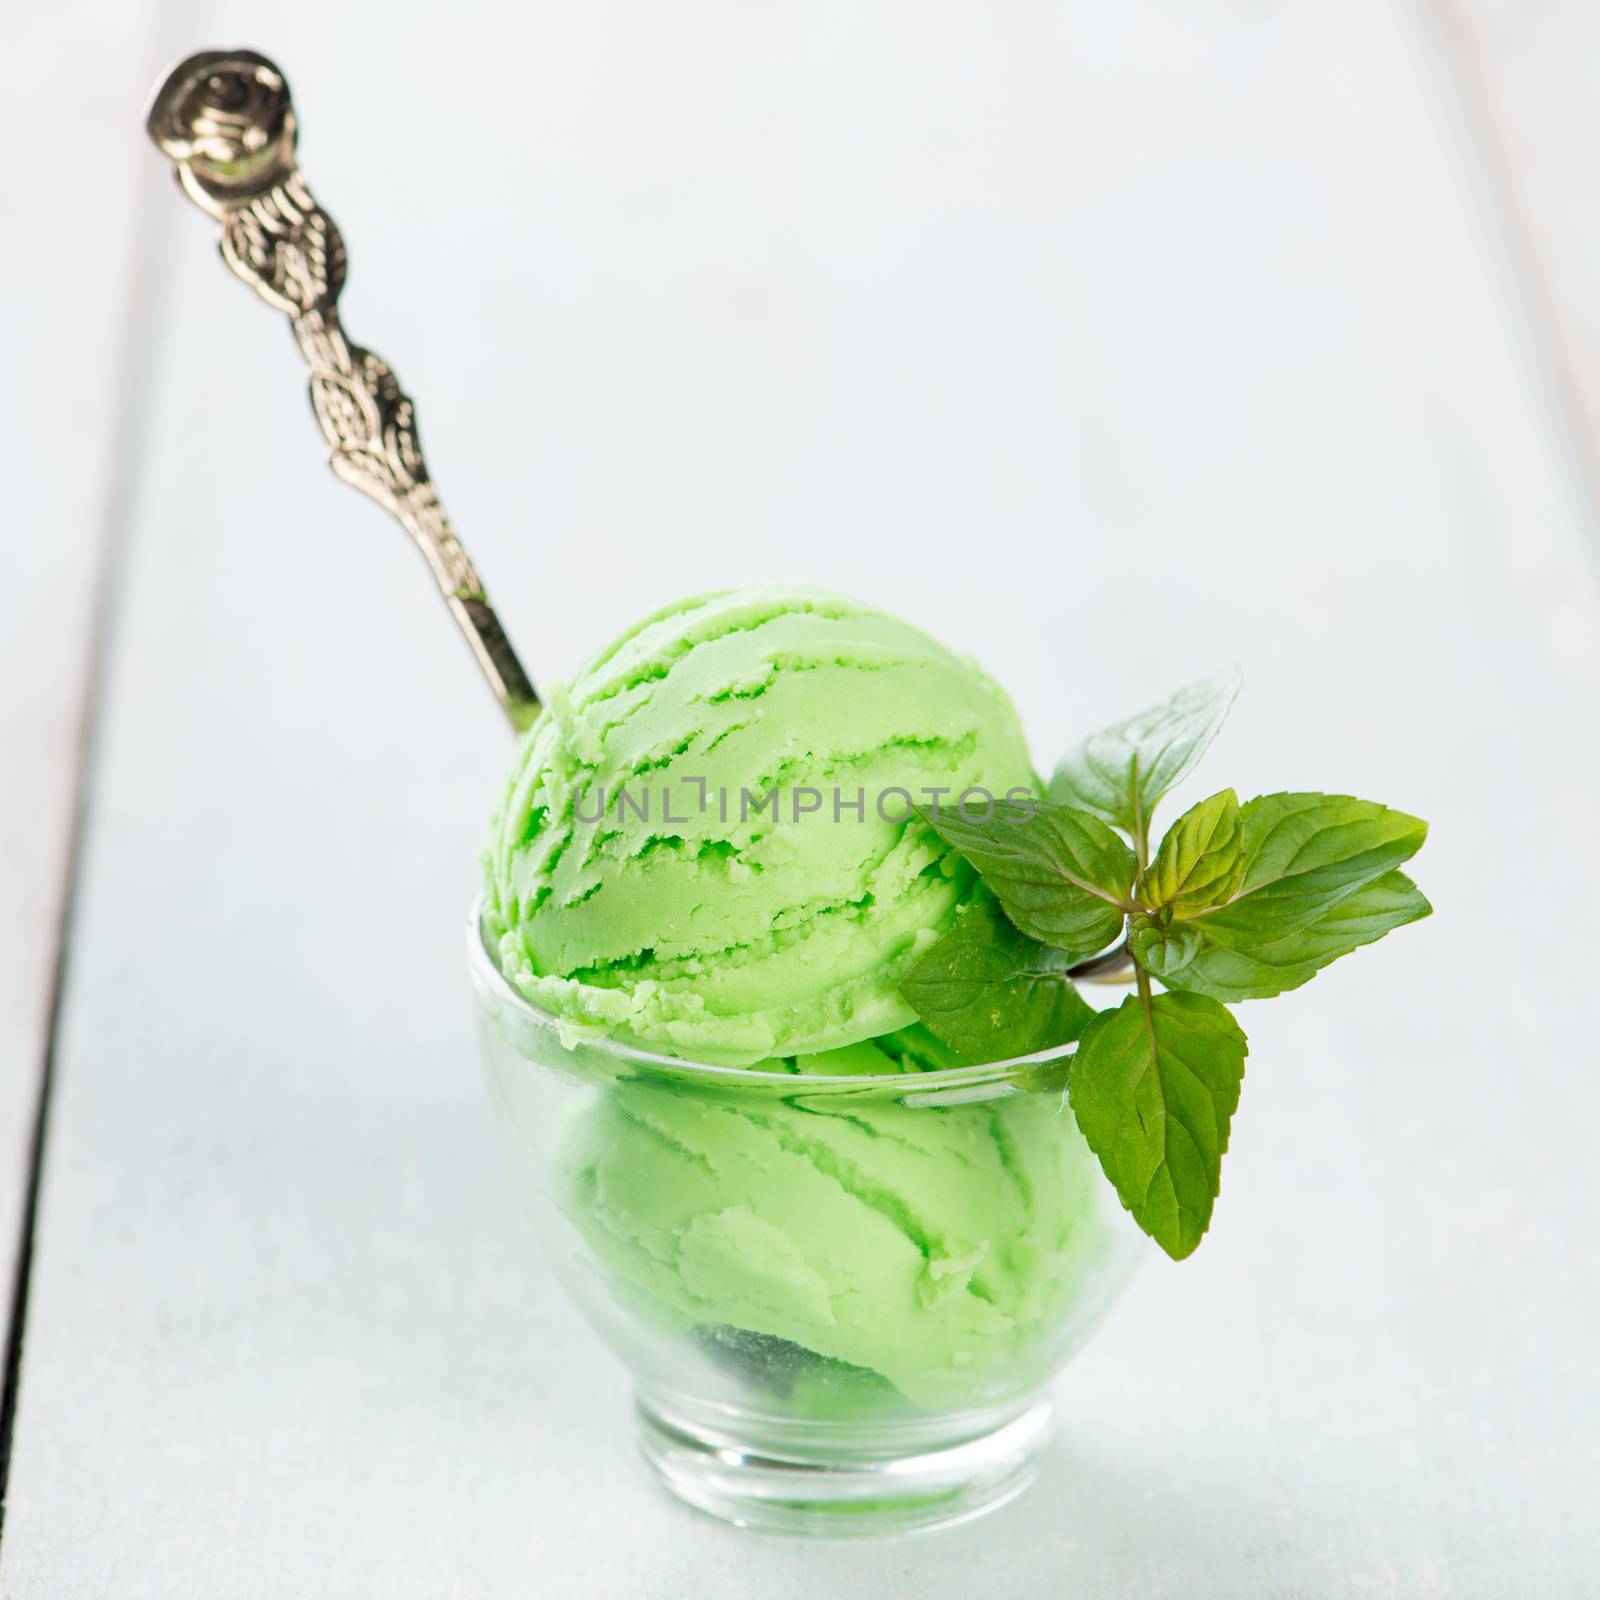 Cup of honeydew ice cream on wooden background.